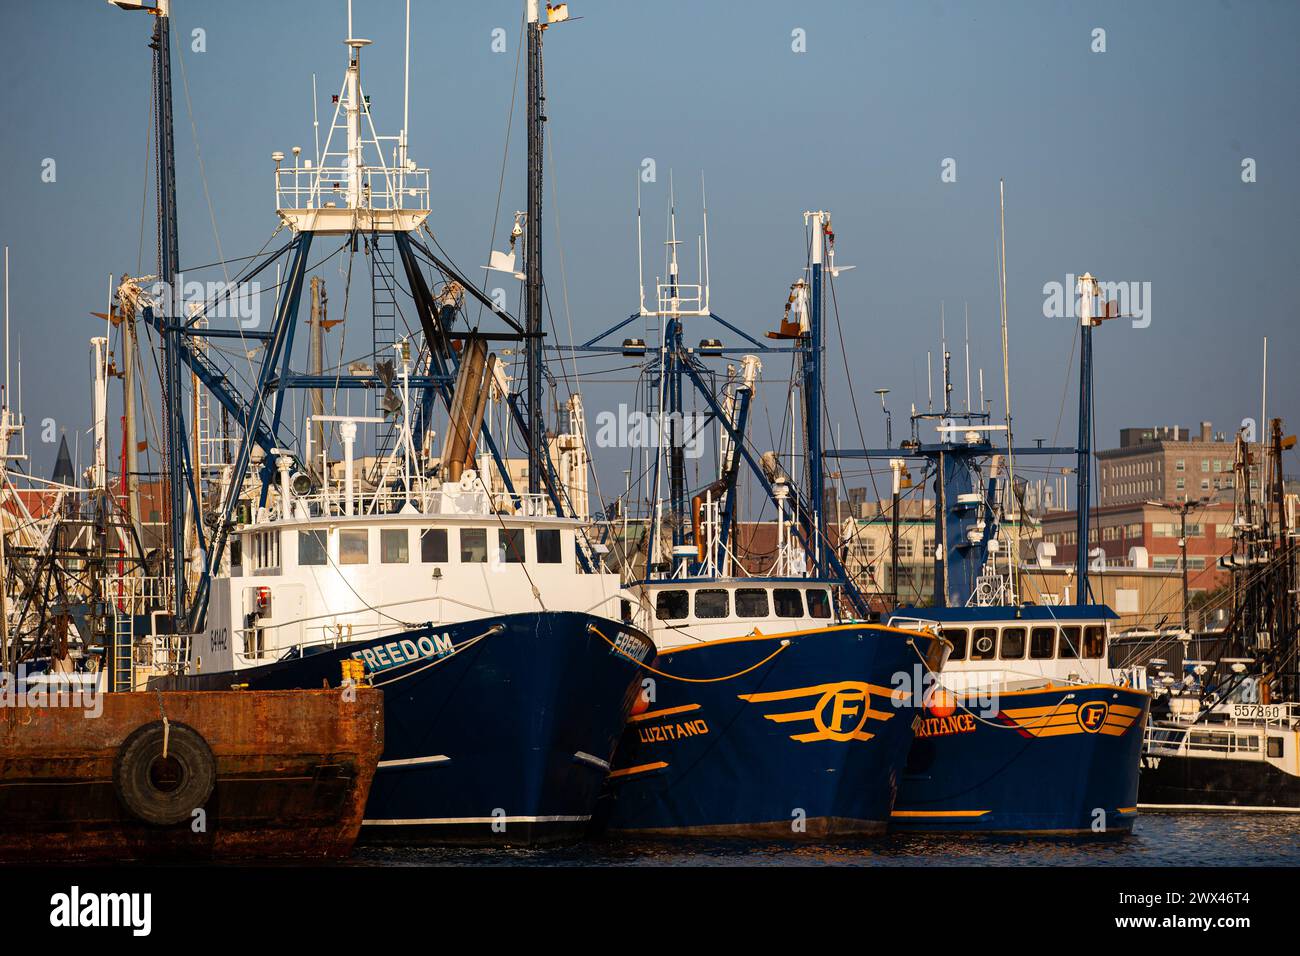 New Bedford, Massachusetts, USA - May 17, 2018: Commercial Fishing Boat  Silverfox, Hailing Port Cape May, New Jersey, Approaching New Bedford From  Buzzards Bay Stock Photo, Picture and Royalty Free Image. Image 146813433.